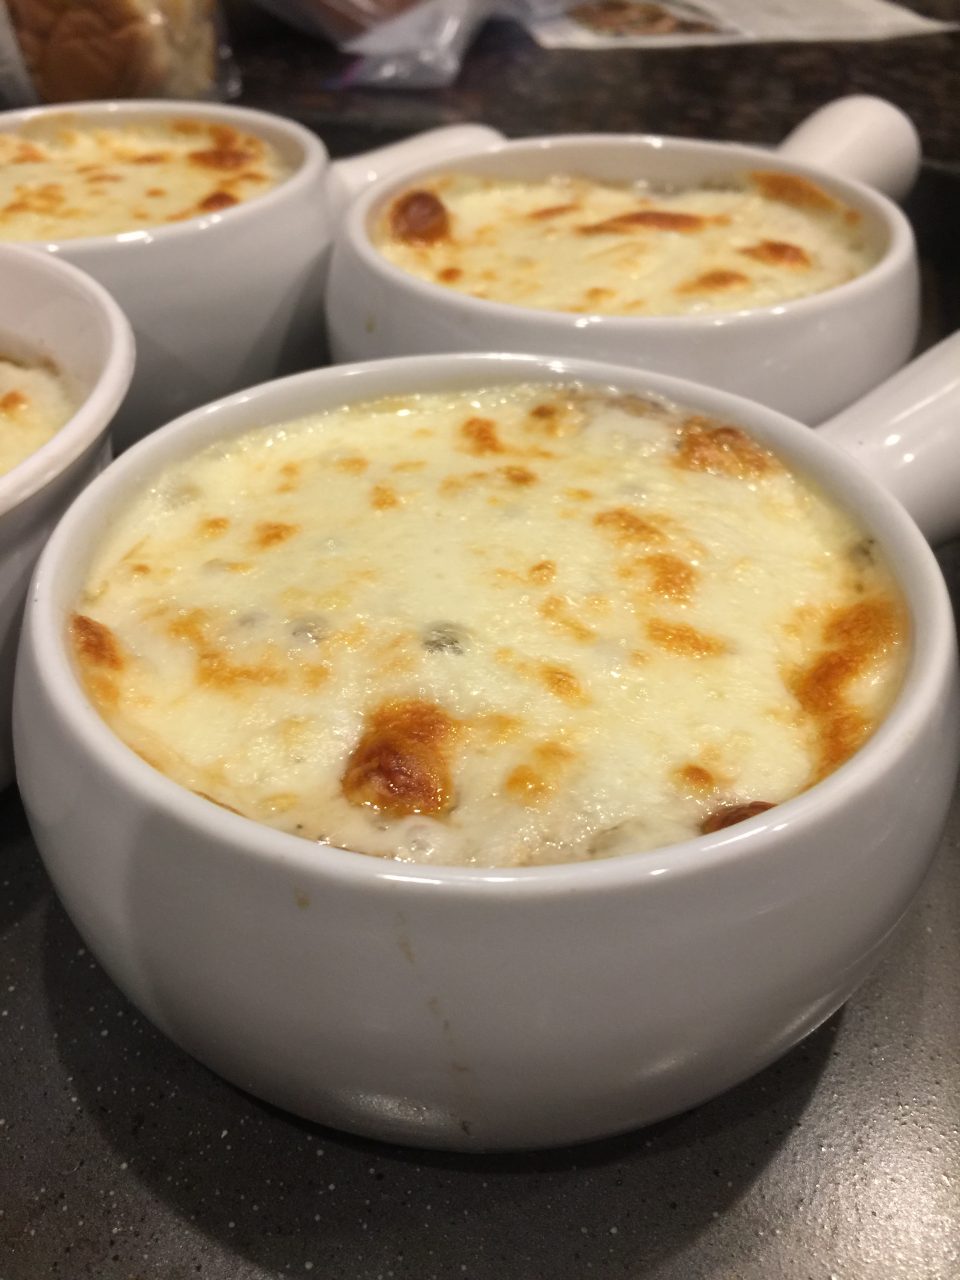 Finished Crock Pot French Onion Soup, cheese broiled.